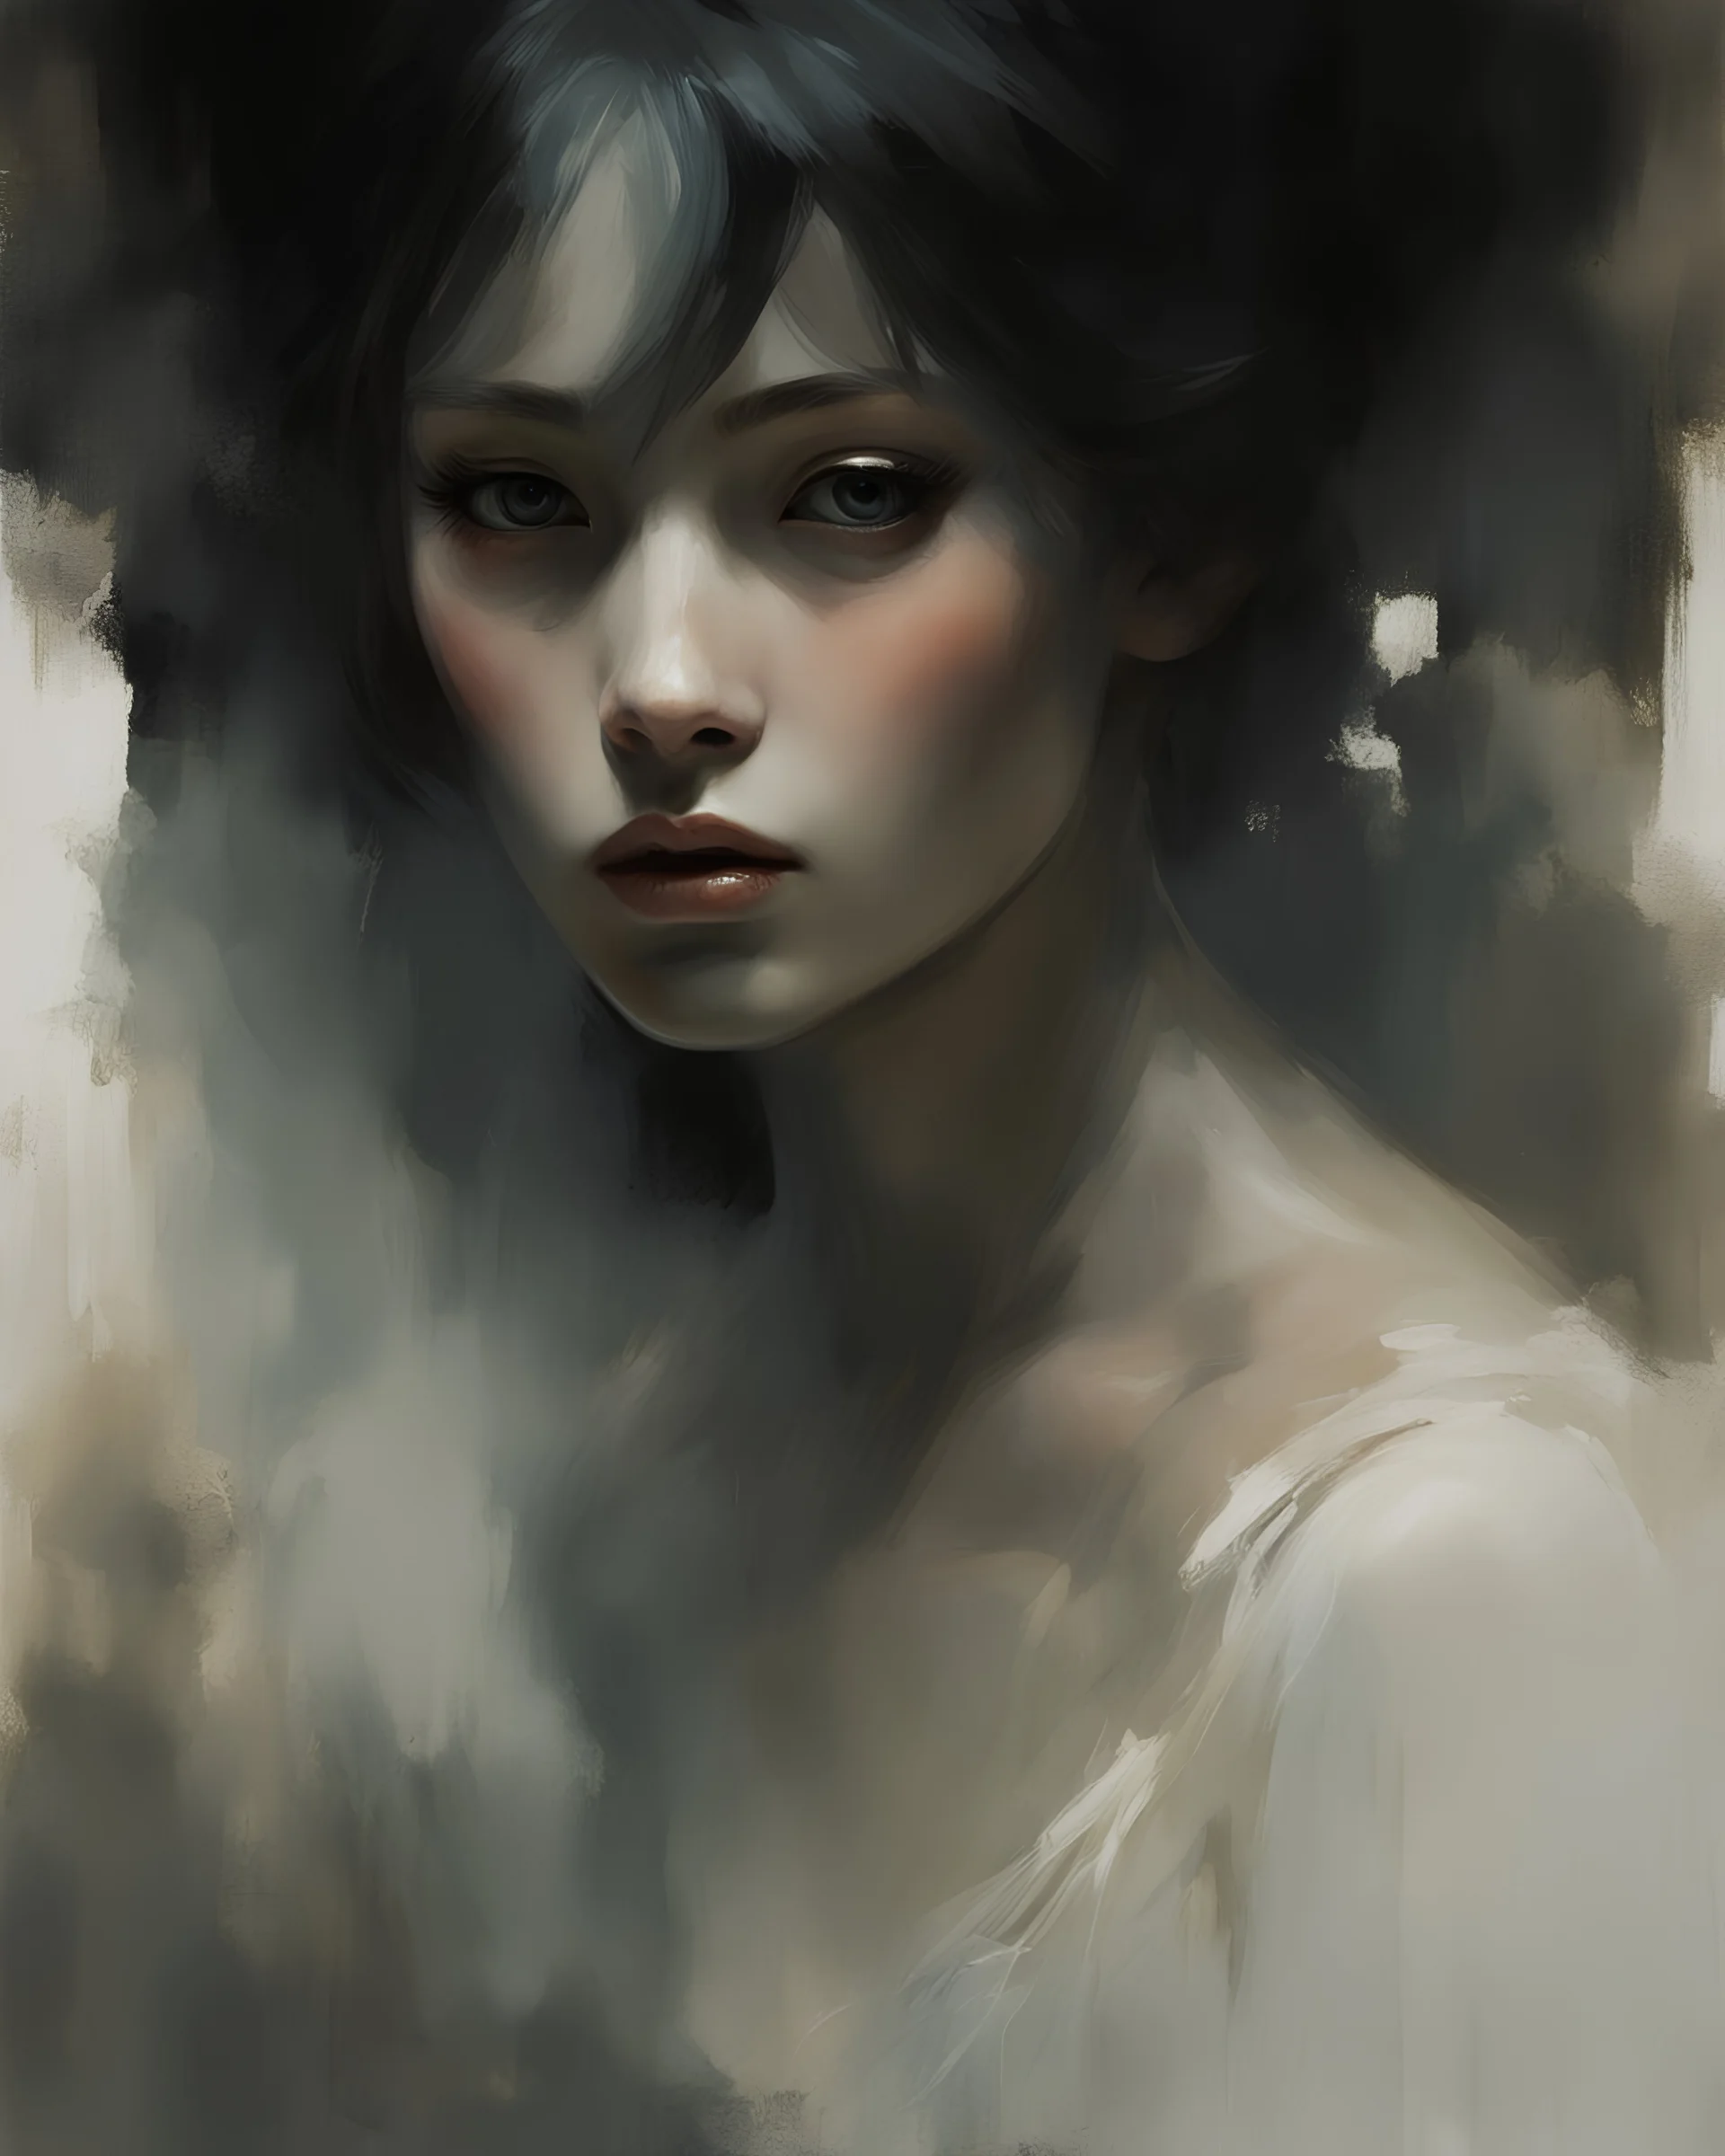 close-up face, portrait painting, vintage, 30 years old, woman,toy doll portrait with black soot on her face, dramatic lighting, skin pots dreamy girl ,dramatic lighting, sharp focus, contrast, art by and Jeremy Mann, digital painting, artstation, concept art